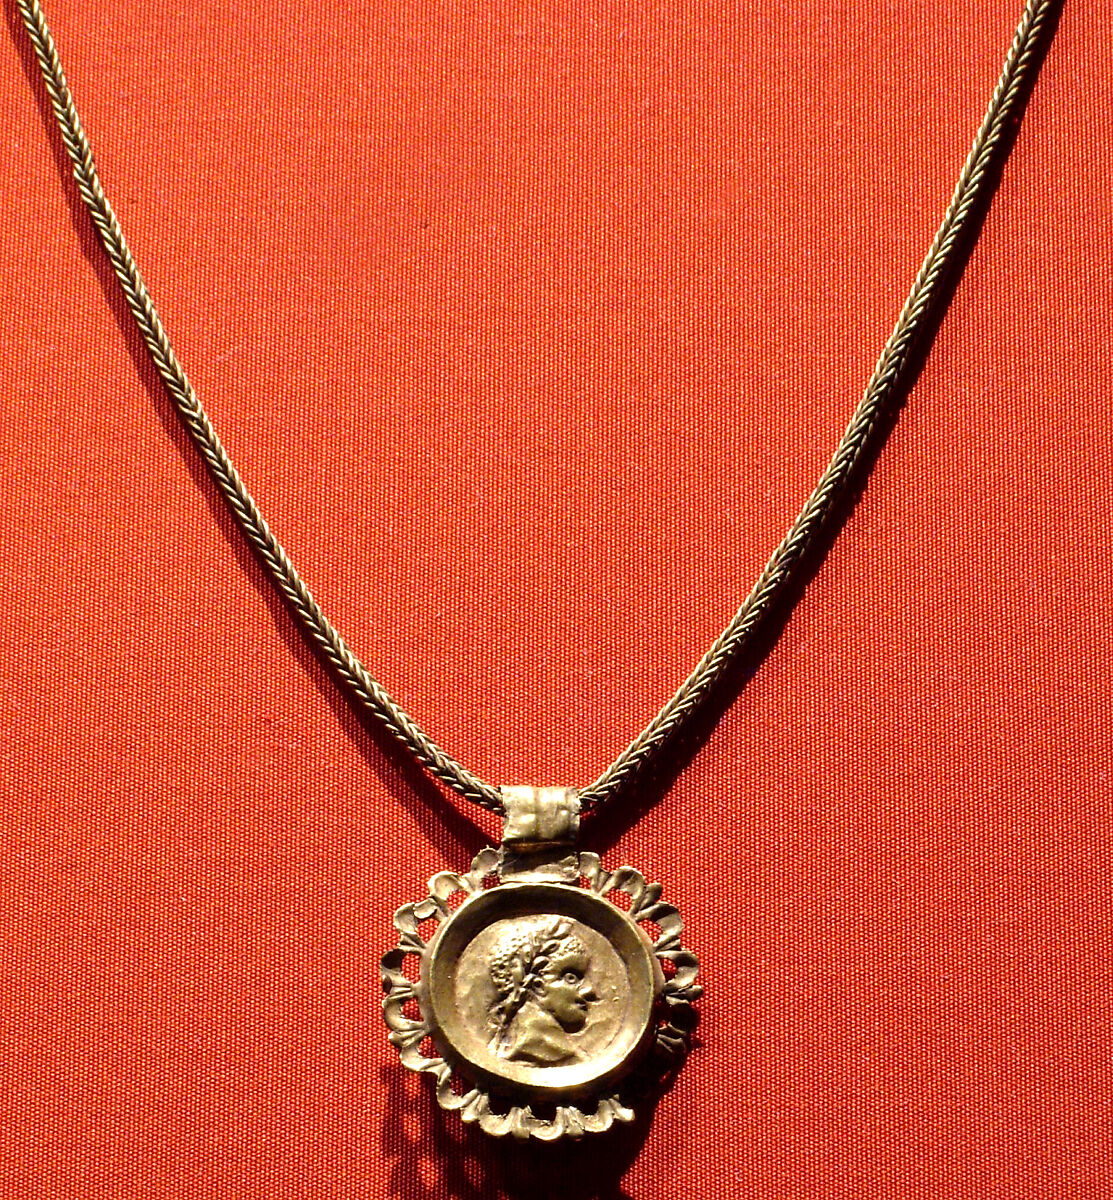 Chain with a pendant bearing an emperor's profile in an openwork frame, gold 